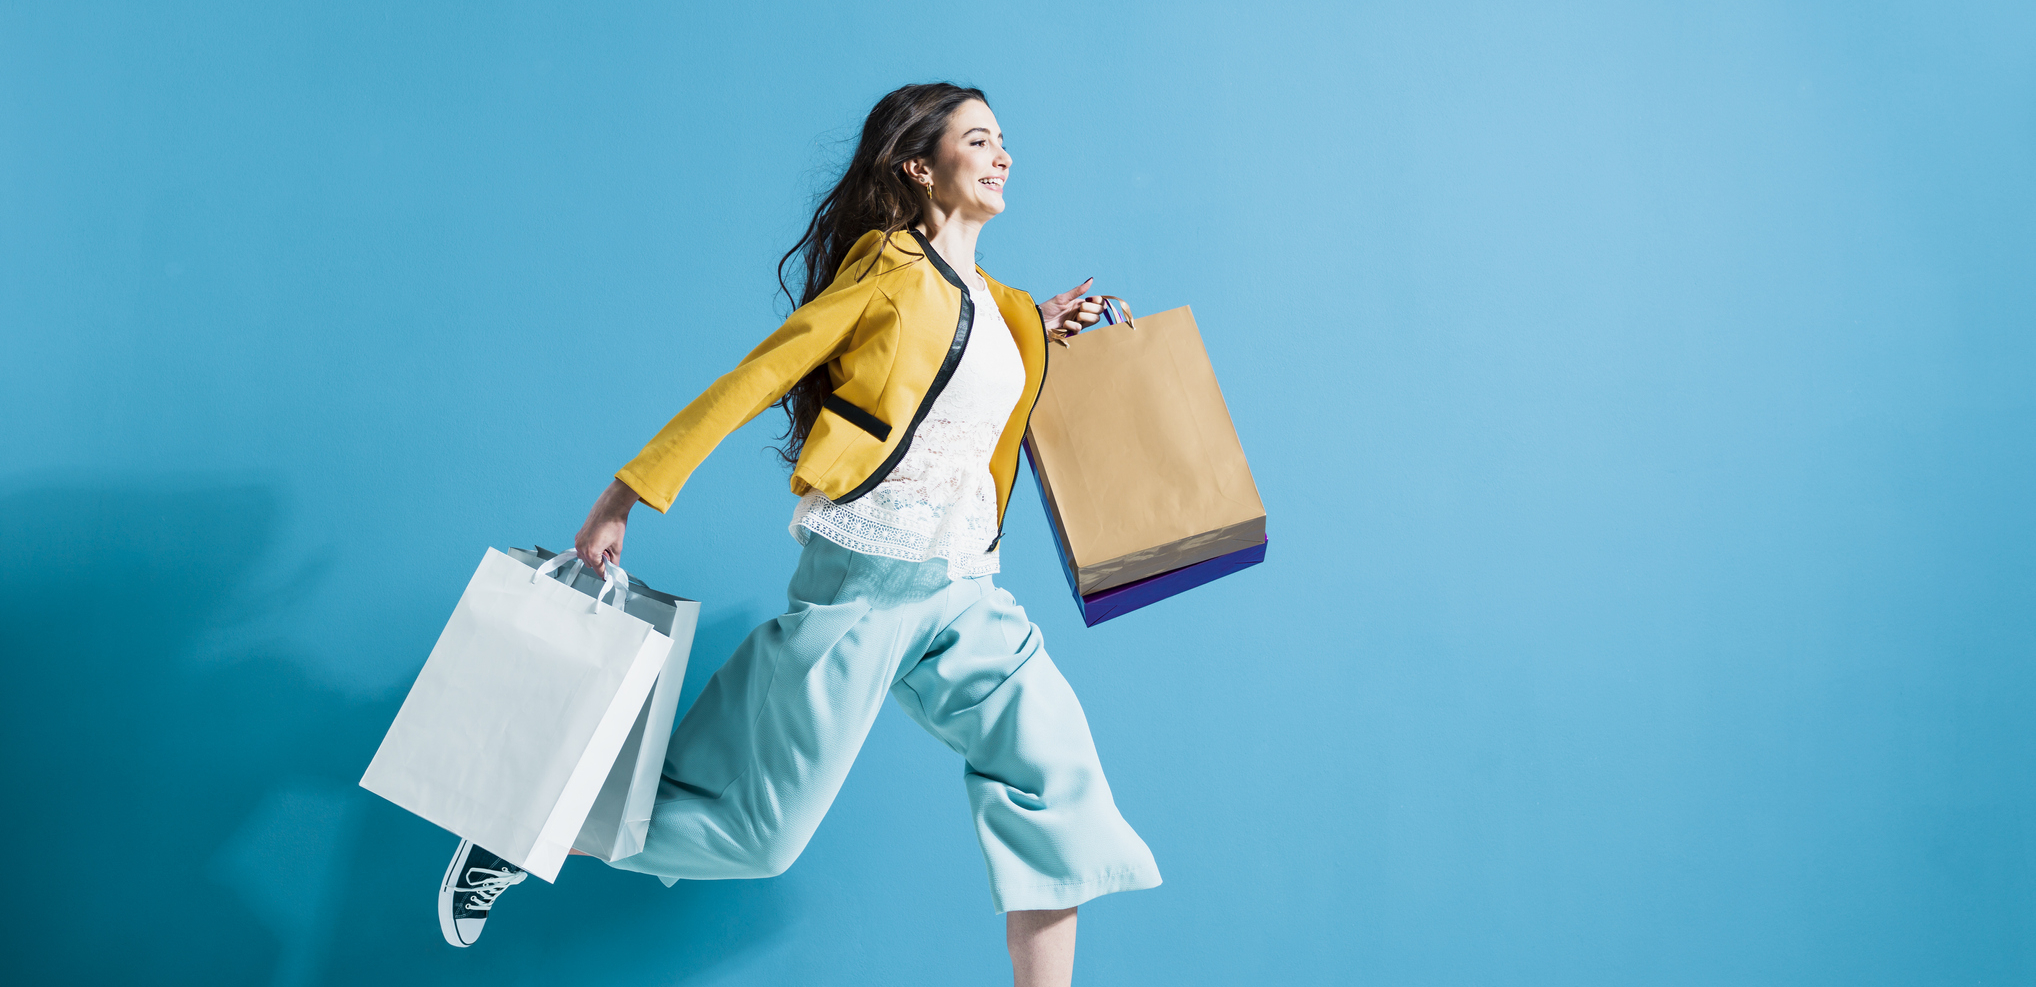 Turn new customers into regular shoppers in 7 easy steps Featured Image